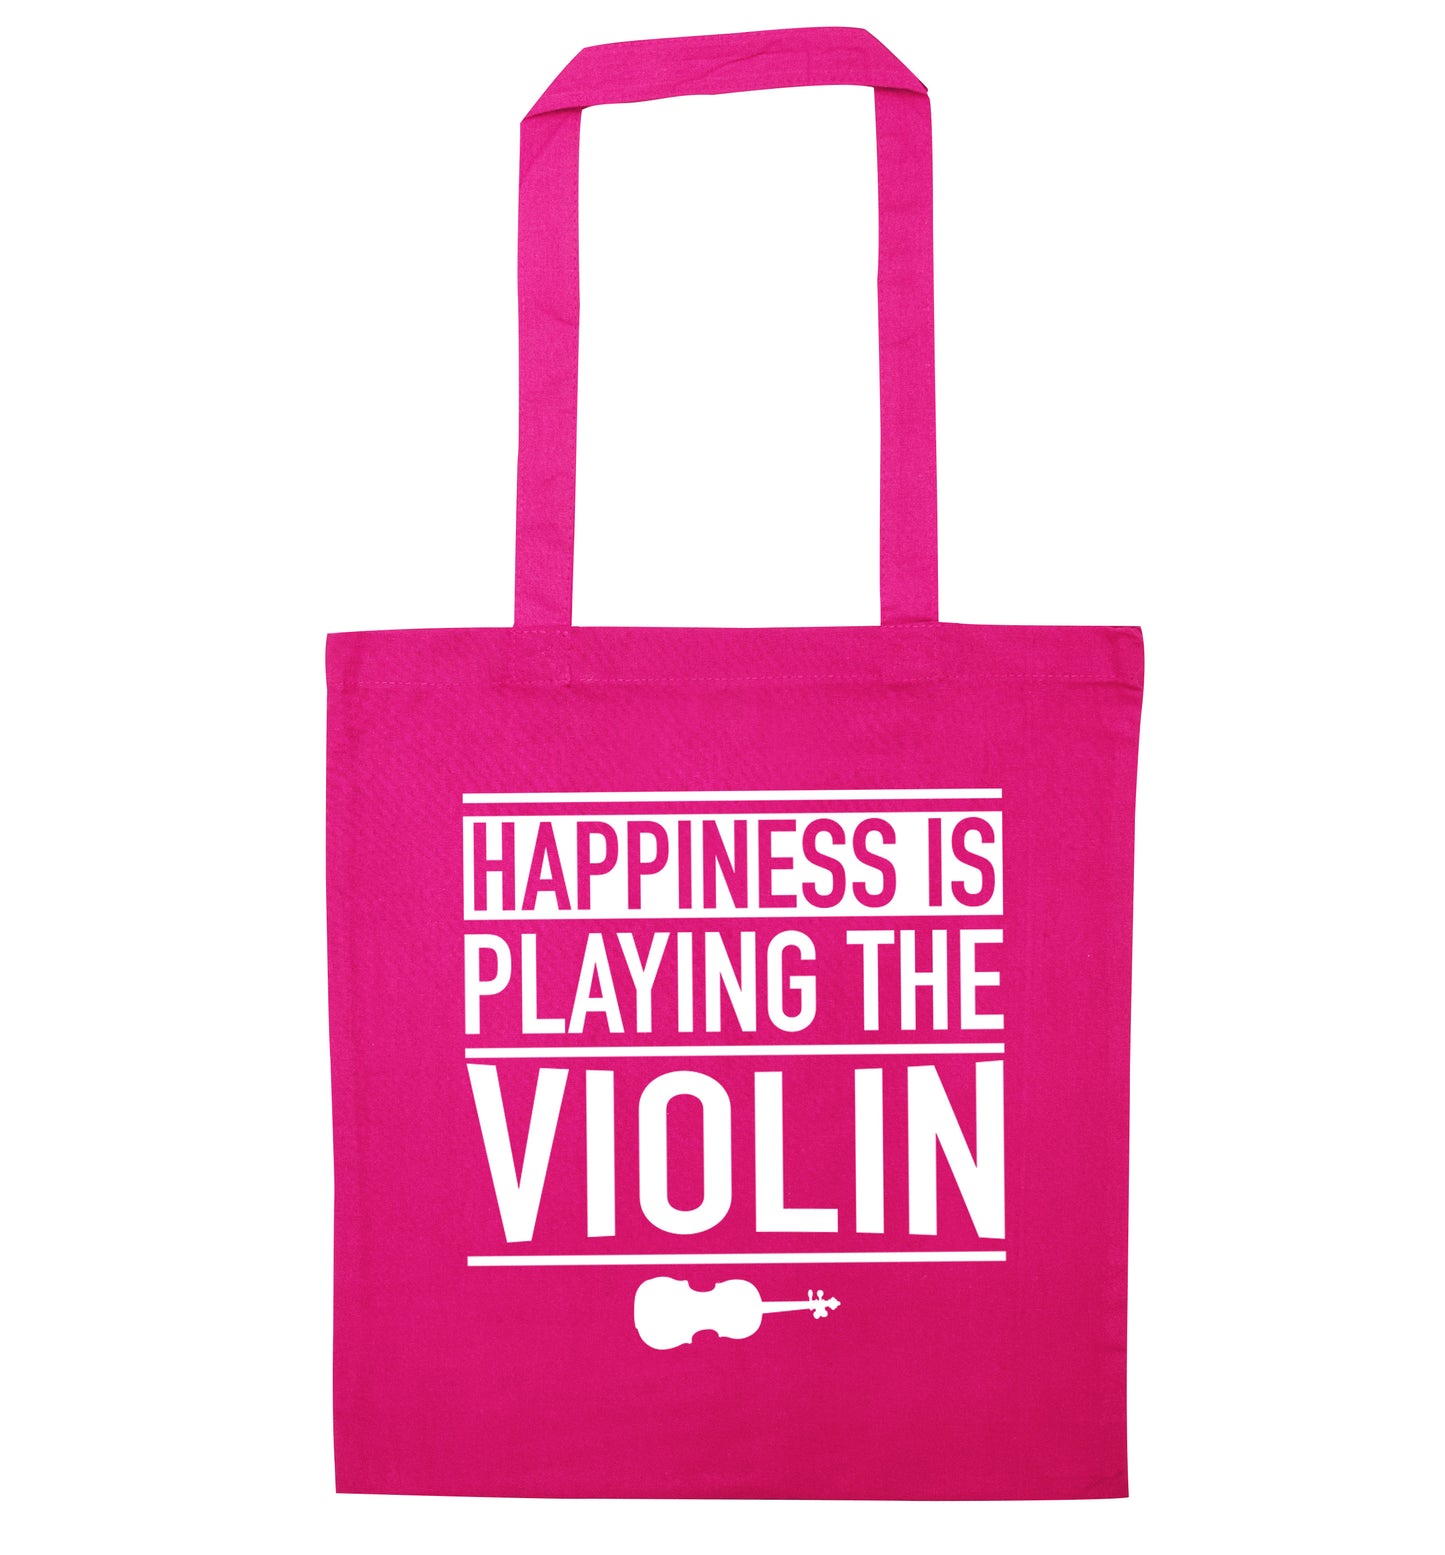 Happiness is playing the violin pink tote bag